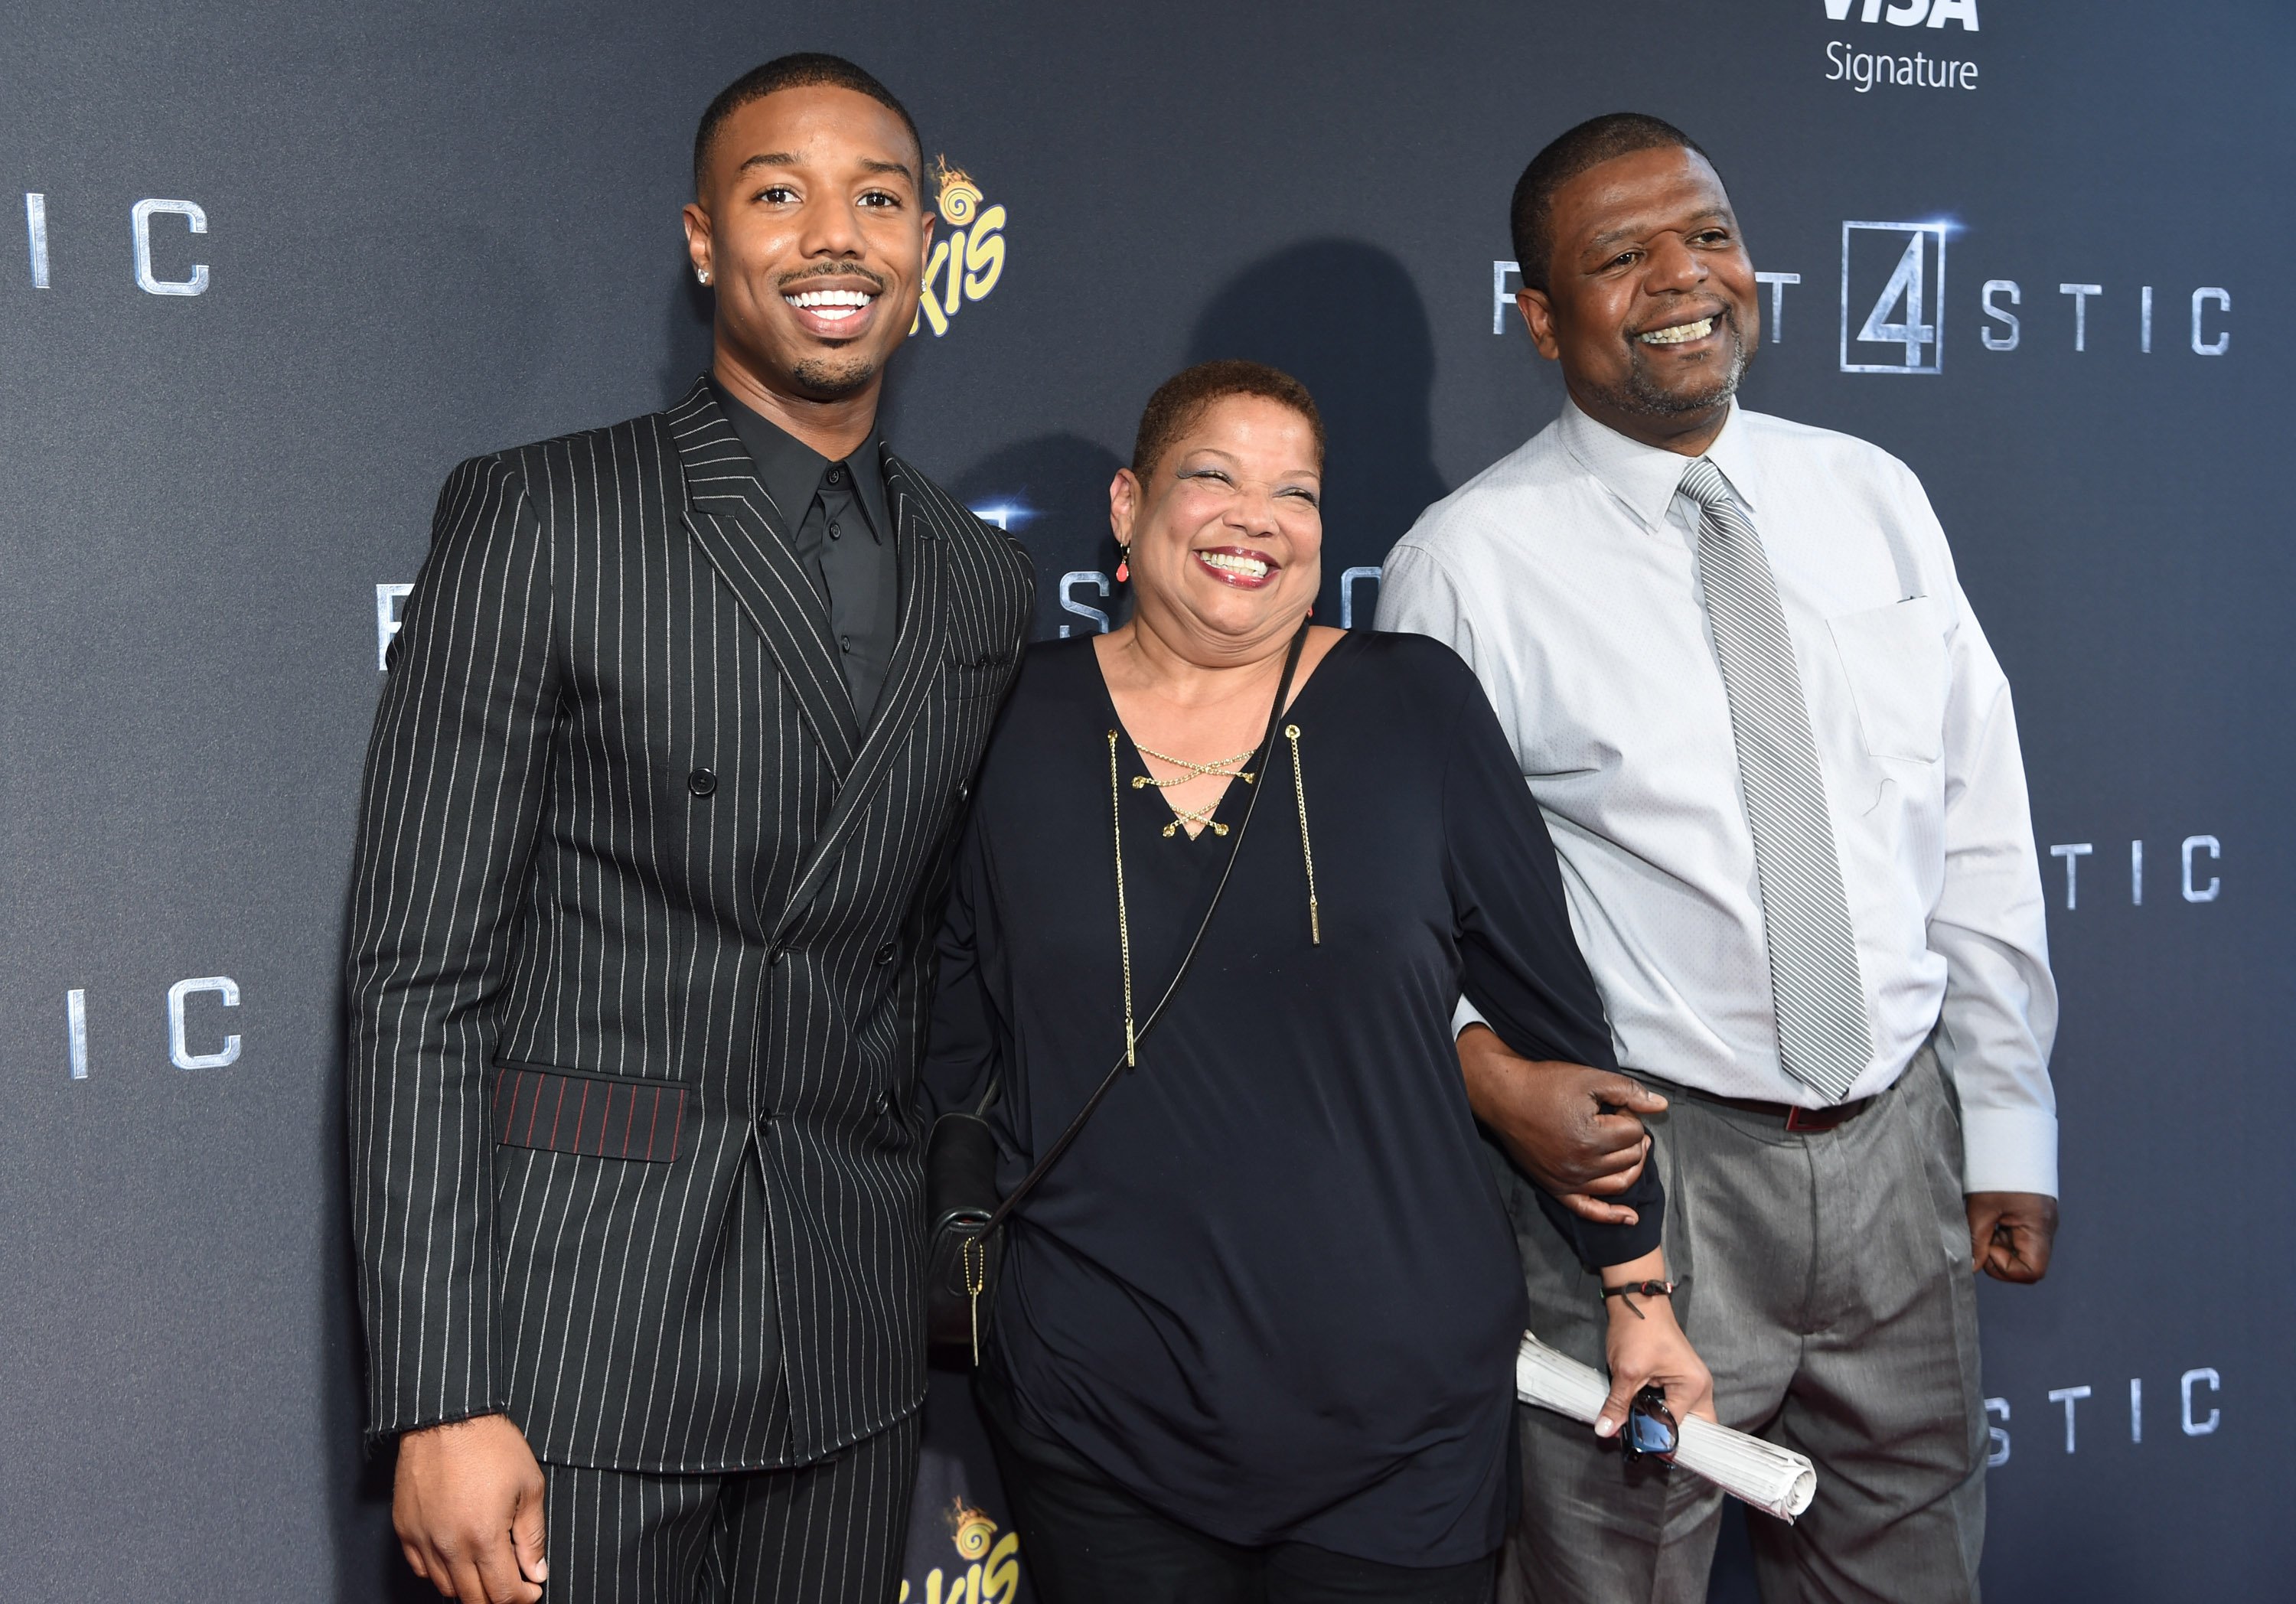 Michael B. Jordan posing with his parents Donna and Michael B. Jordan at the New York premiere of "Fantastic Four" at Williamsburg Cinemas on August 4, 2015 in New York City. | Source: Getty Images